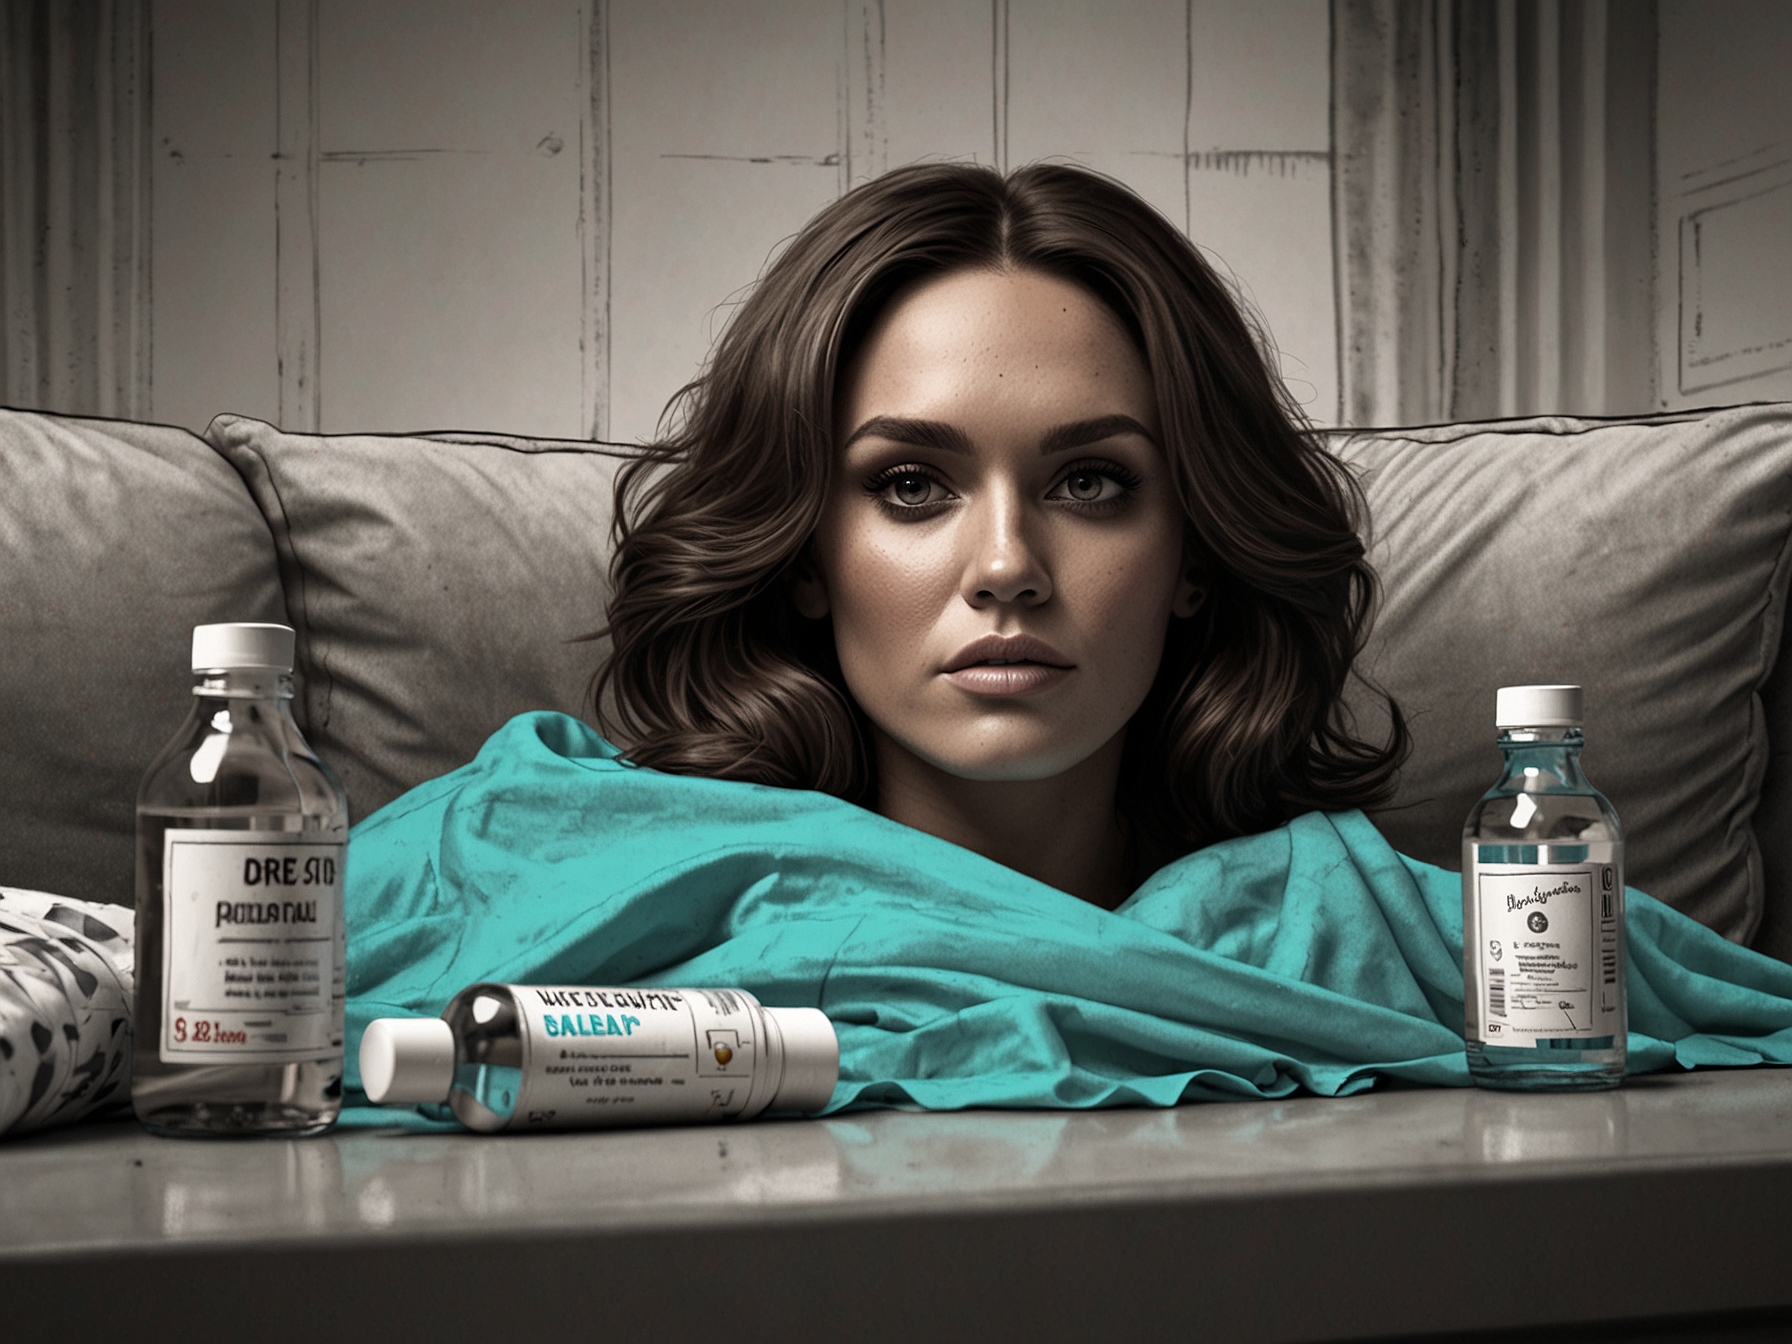 Vicky Pattison lying on a couch covered with a blanket, looking tired and weak, surrounded by medicine and water bottles, illustrating severe fatigue caused by glandular fever.